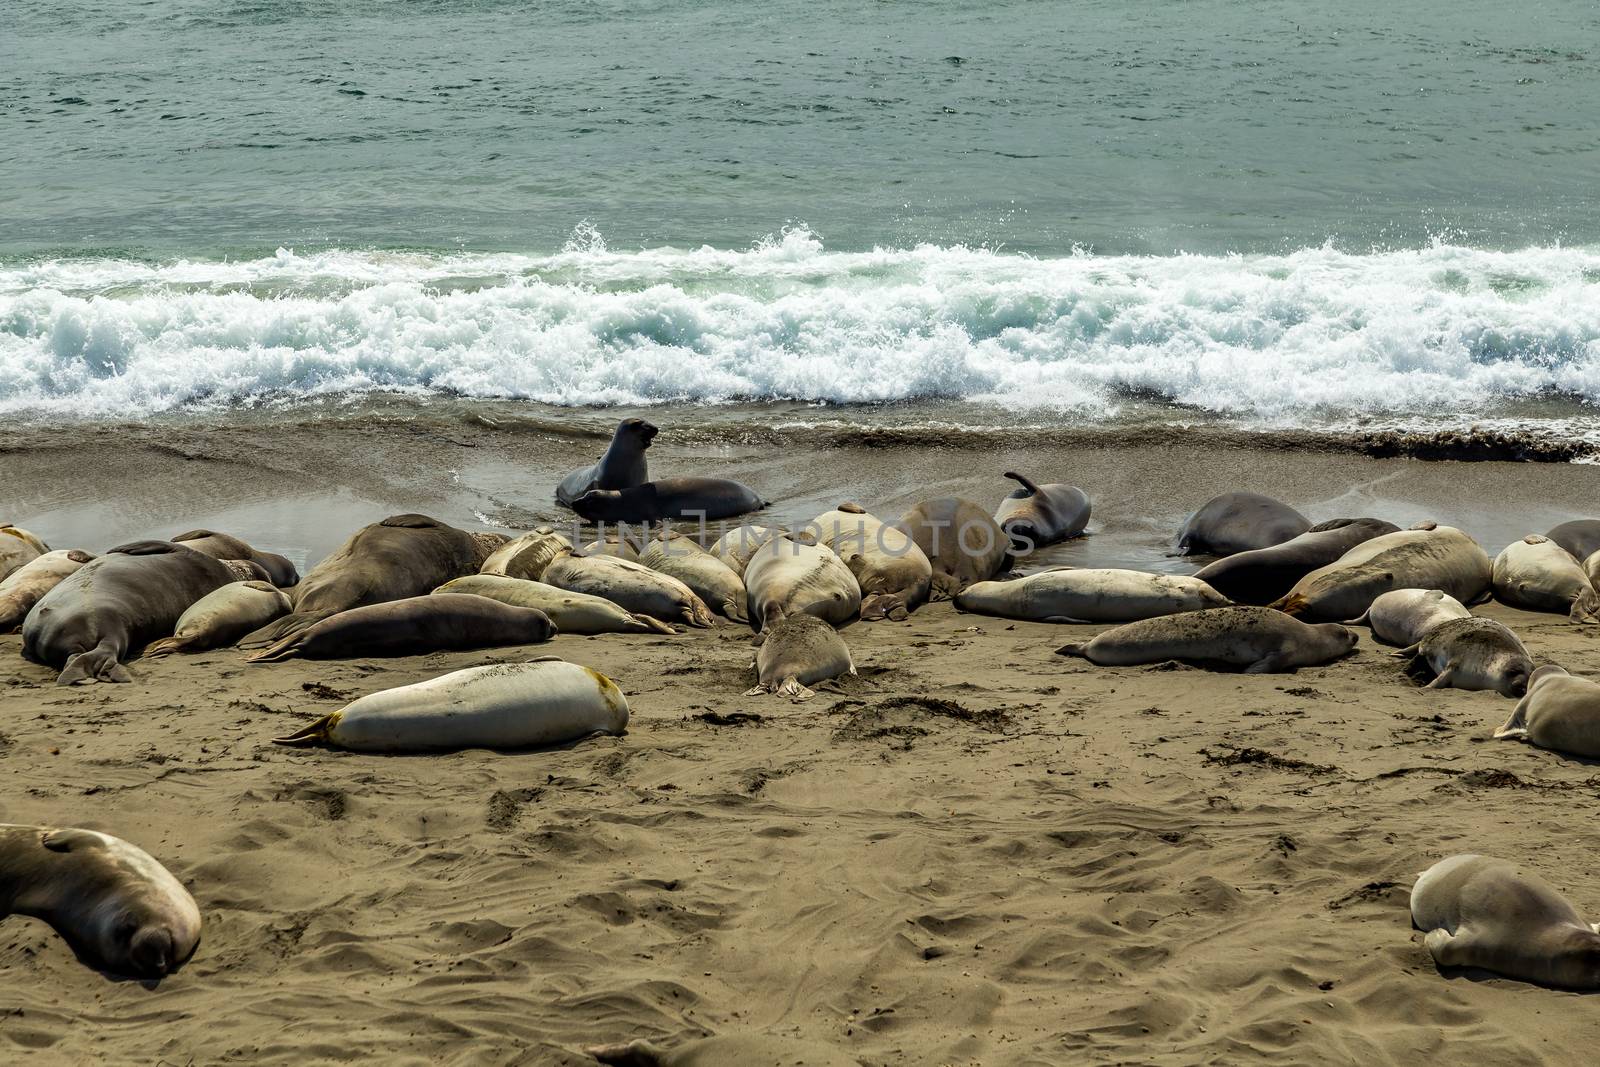 Male elephant seals are much larger than the females and have a trunk-like nose, from which the species gets its name.